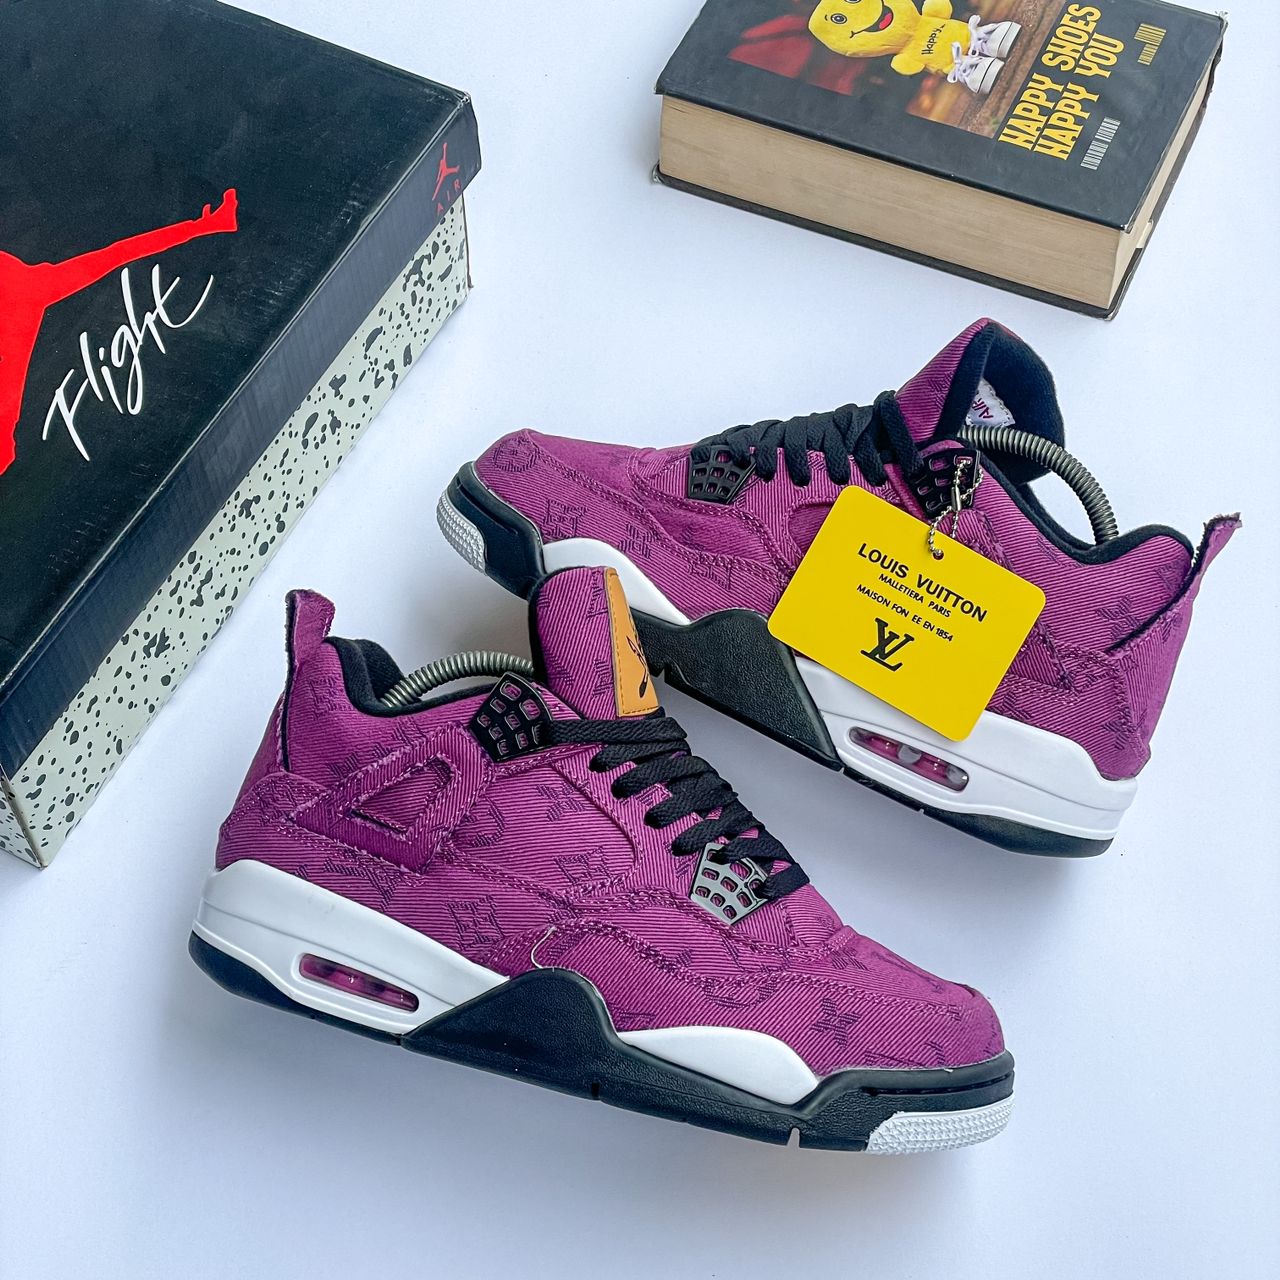 CONVERT 🇳🇬 on X: Louis Vuitton X Air Jordan 4 Retro Now Available In  Store 🏬 Size👟: 40 - 47‼️ Price💰: 35,000 Naira Please 🙏🏾 Please Repost  🫡  / X